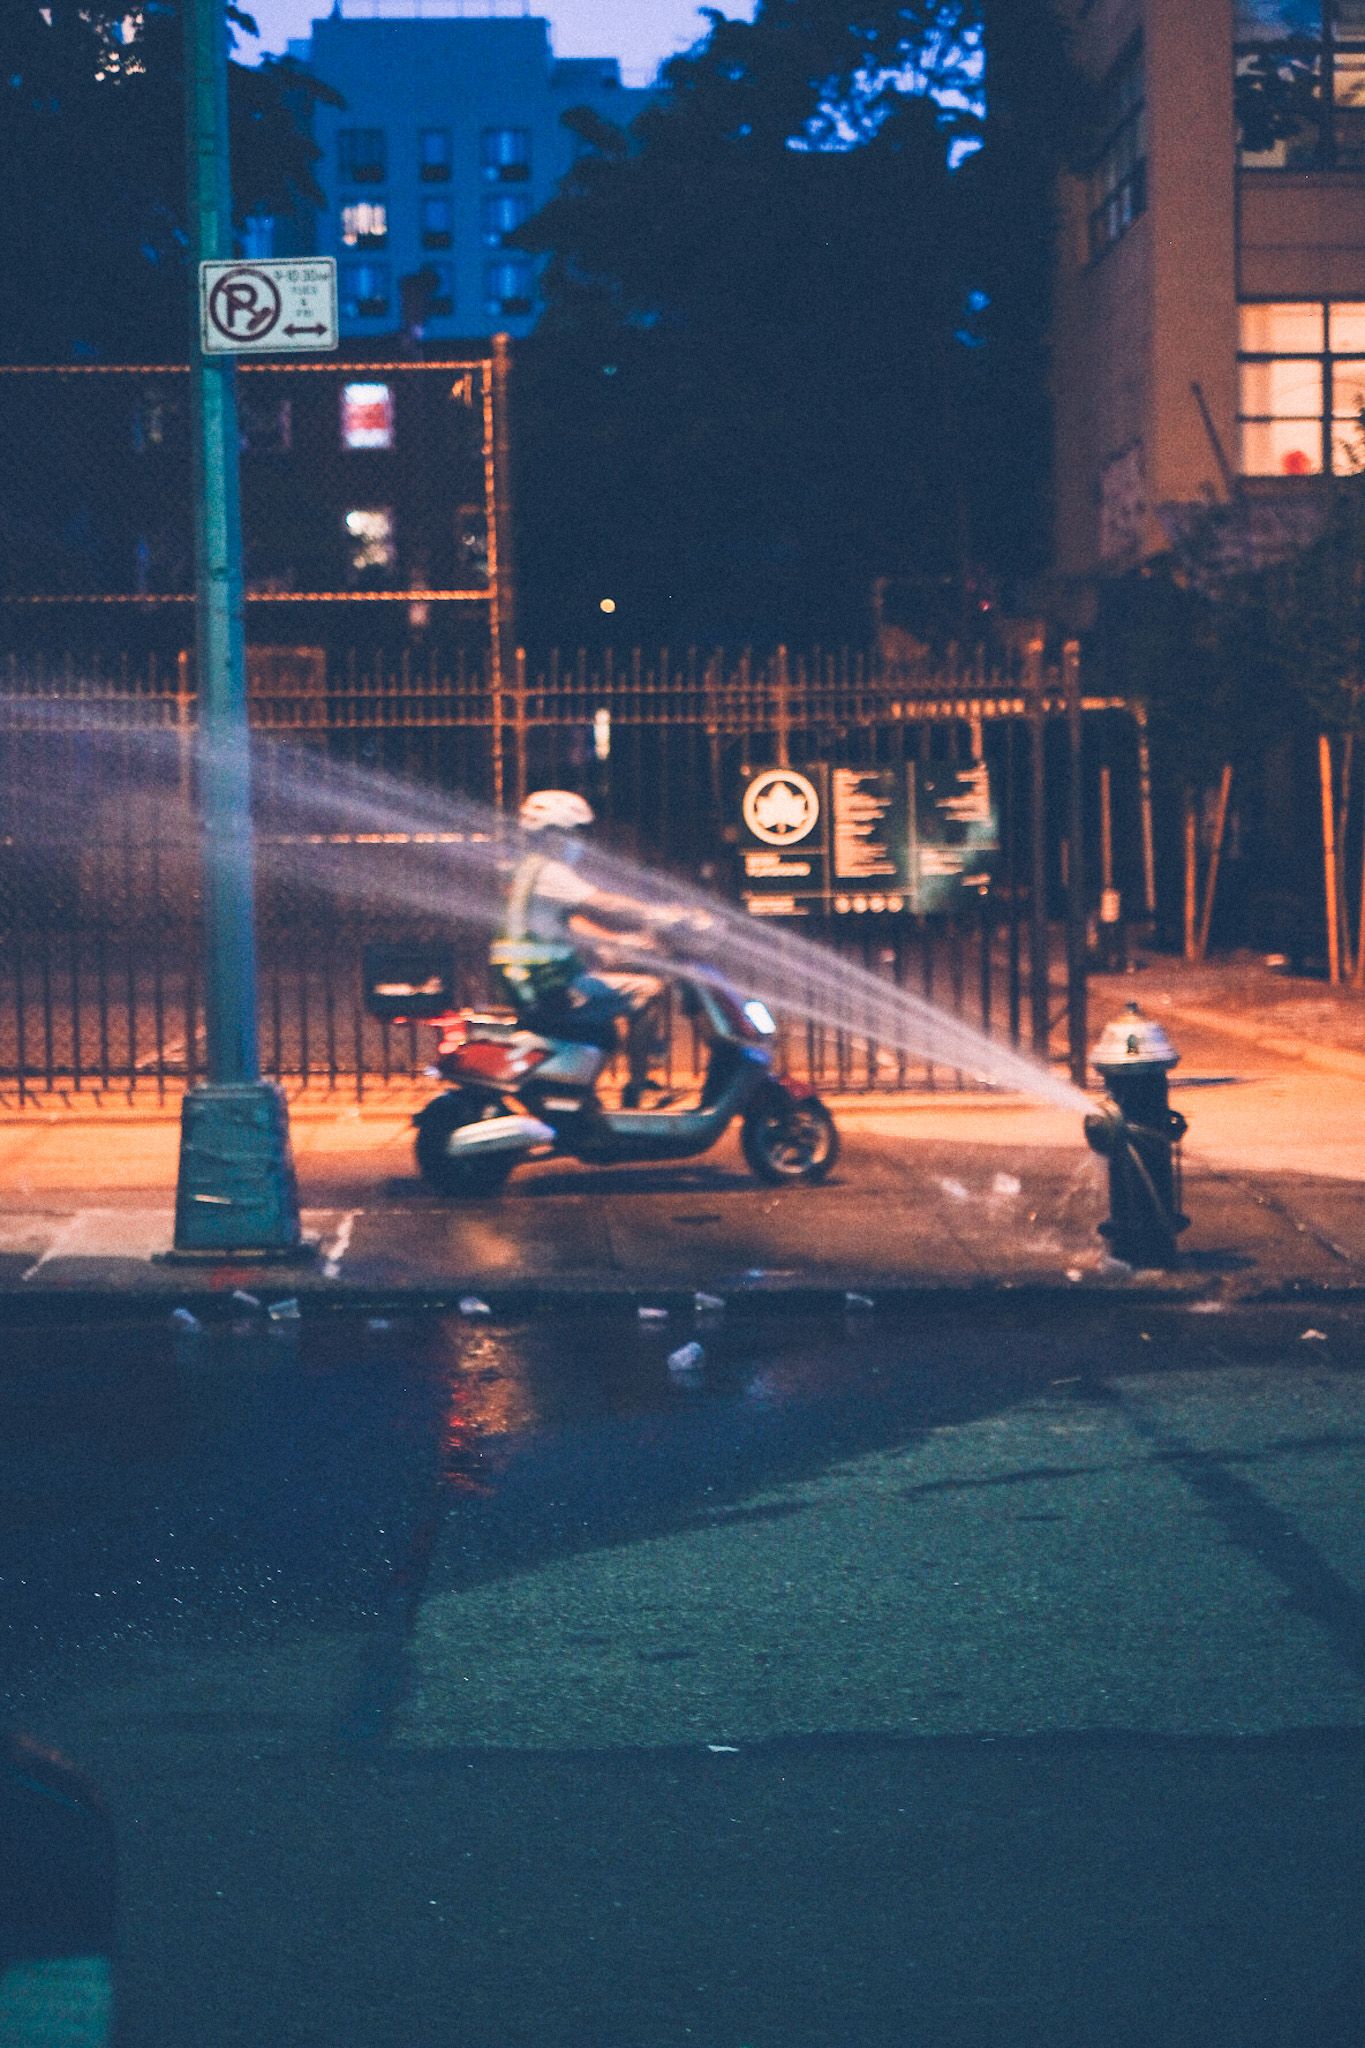 A fire hydrant is set loose on a city street at night, lit with golden street lamp. A man on a motorcycle rides past in a blur.